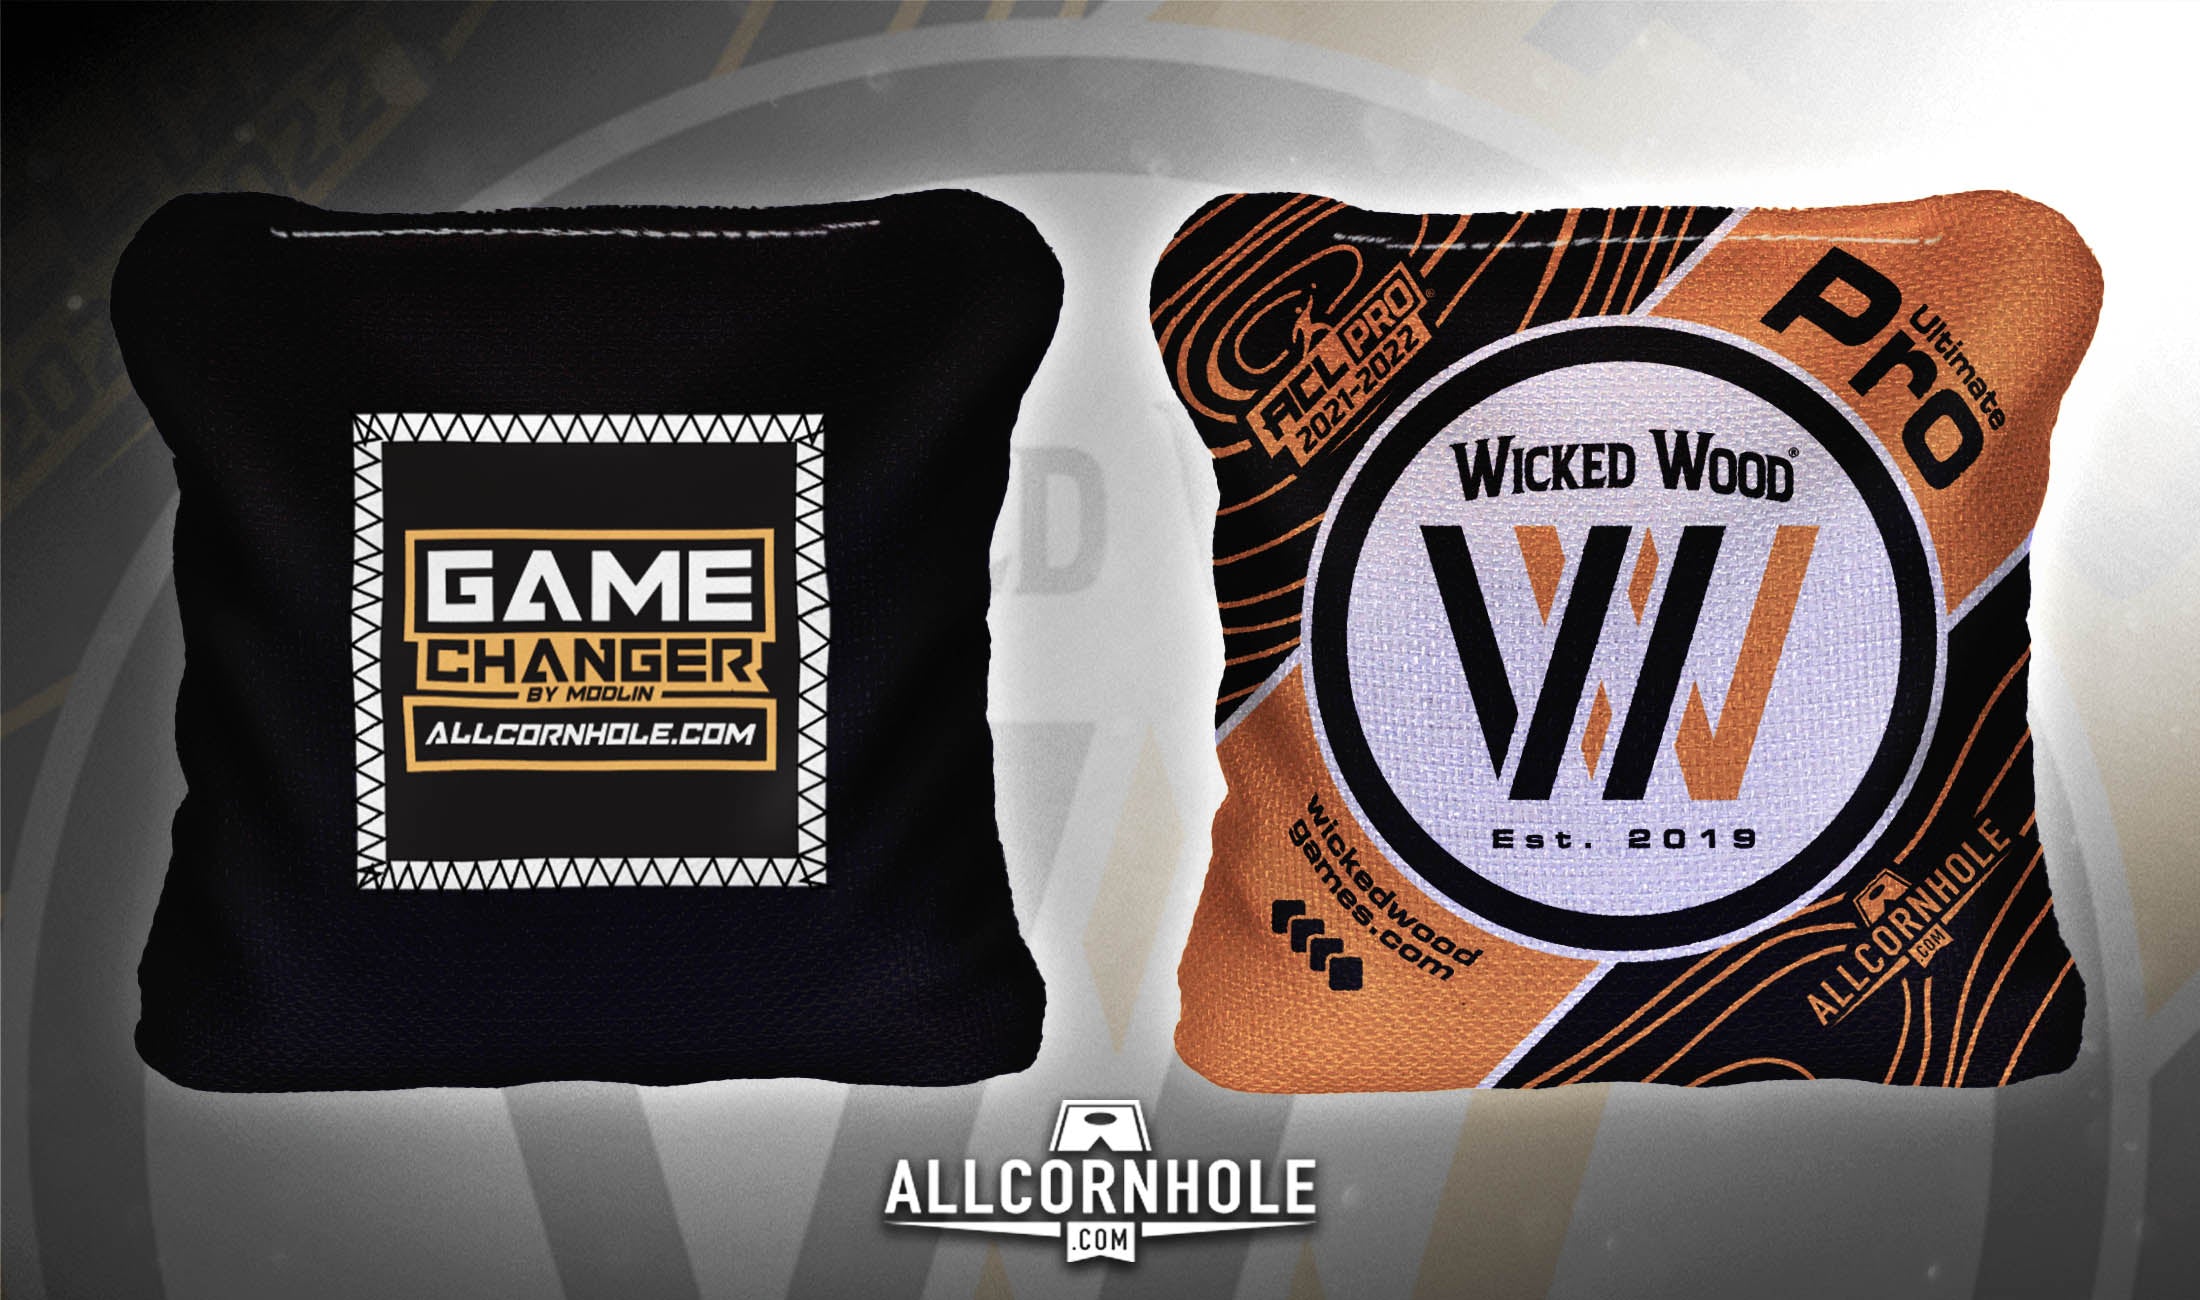 Wicked Wood Pro Bags - GameChanger 1x4 - Wicked Wood Games